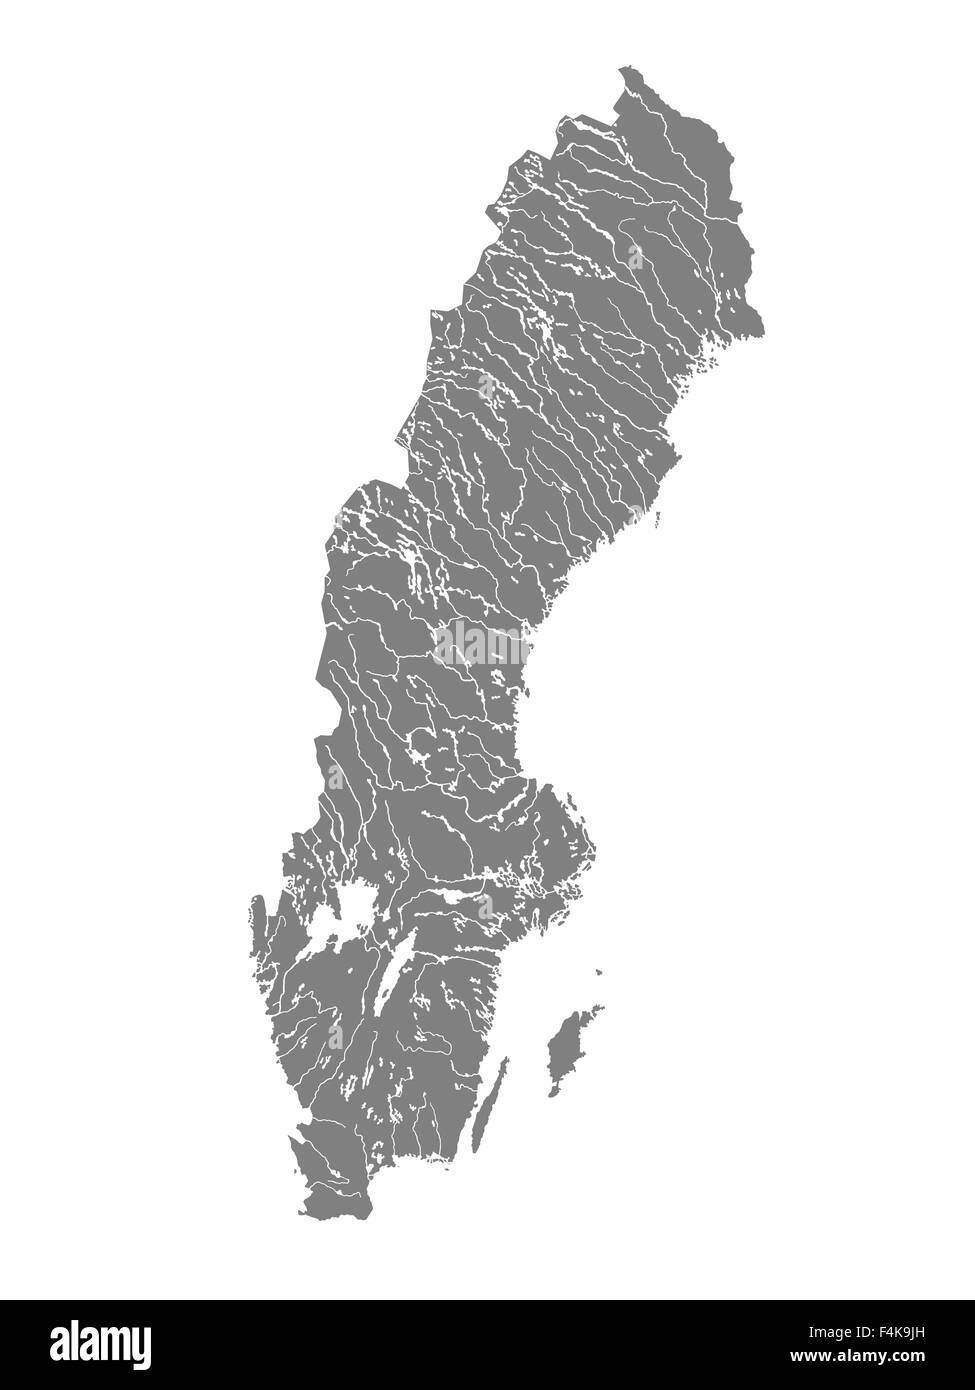 Map of Sweden with rivers and lakes. Stock Photo